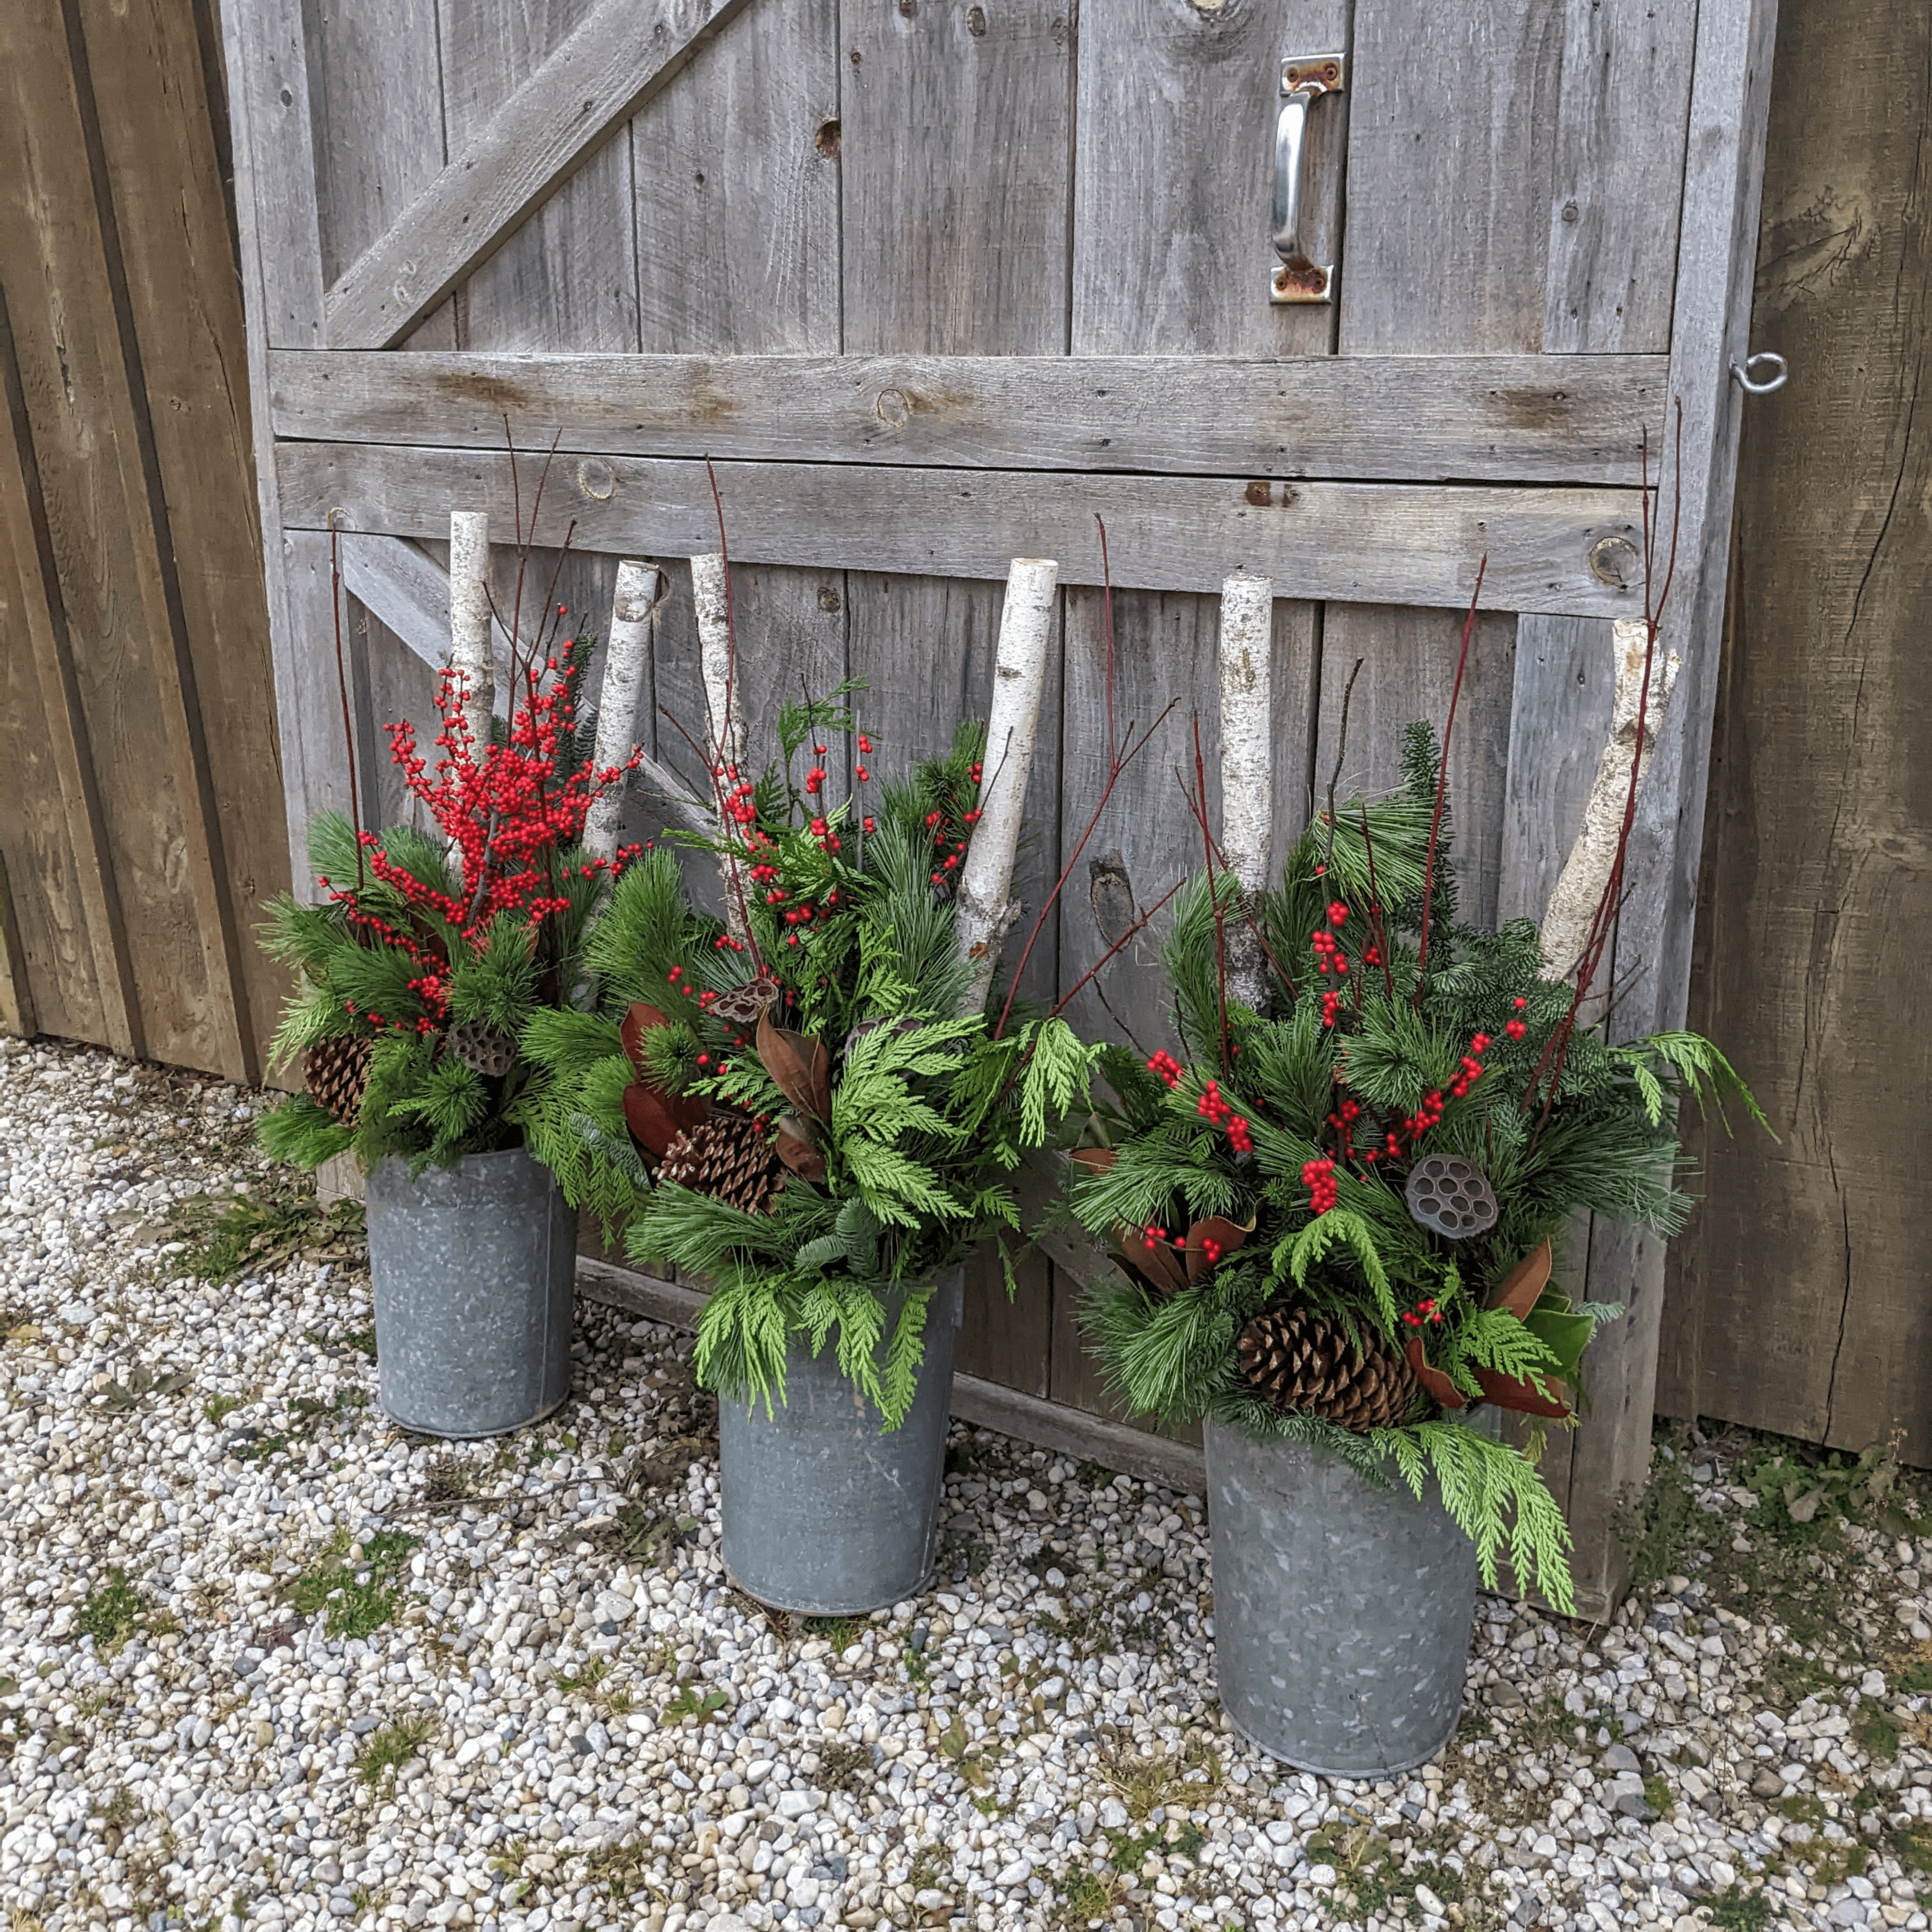 Three Winter Planters designed in a vintage metal sap bucket filled with a mix of greenery, fresh red berries, pine cones, magnolia leaves, red dog wood and birch sticks sitting in front of a wooden barn door.